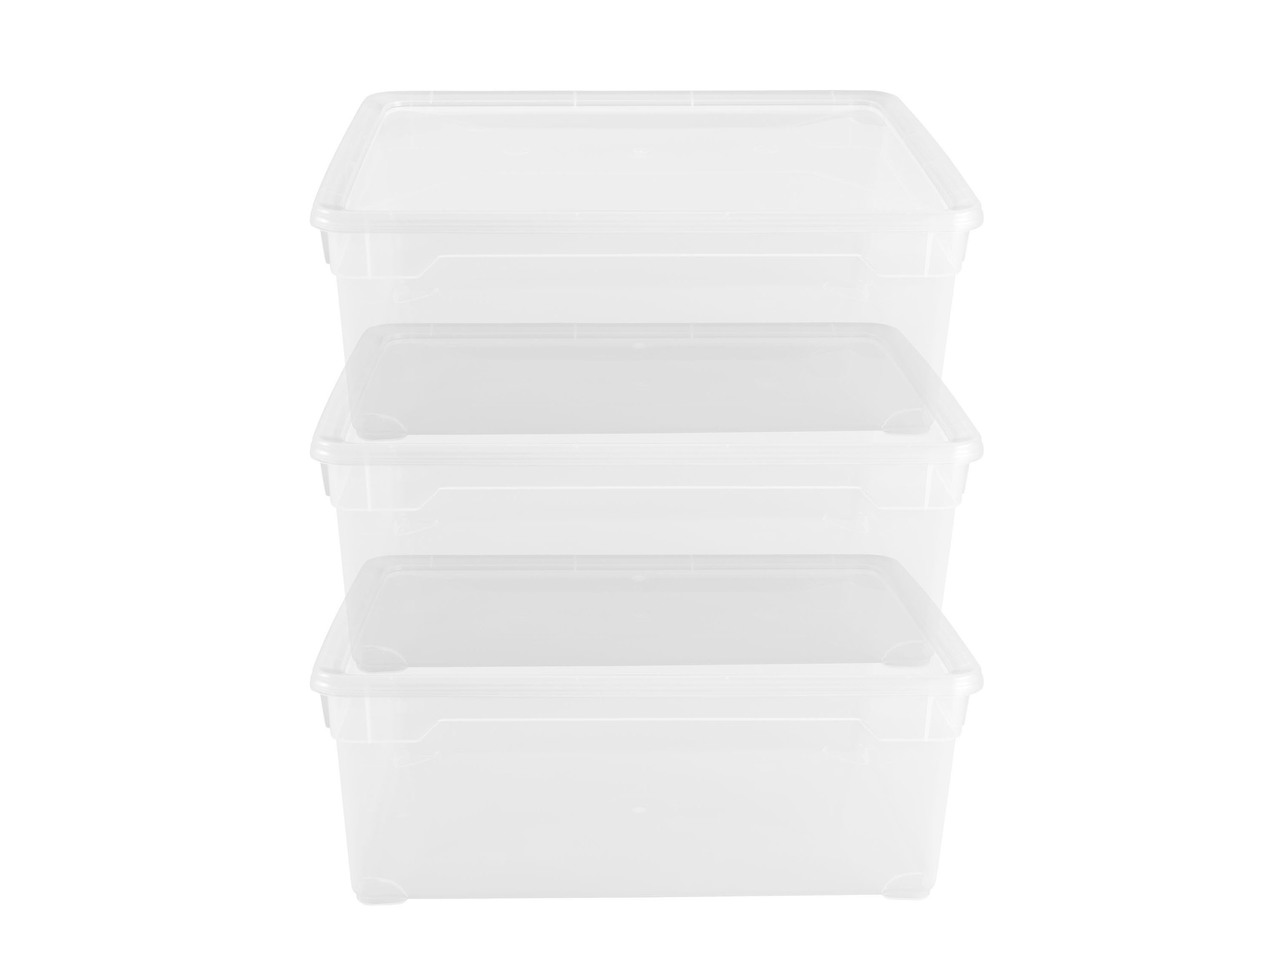 All-Purpose Boxes, 3 pieces big/ 4 pieces small